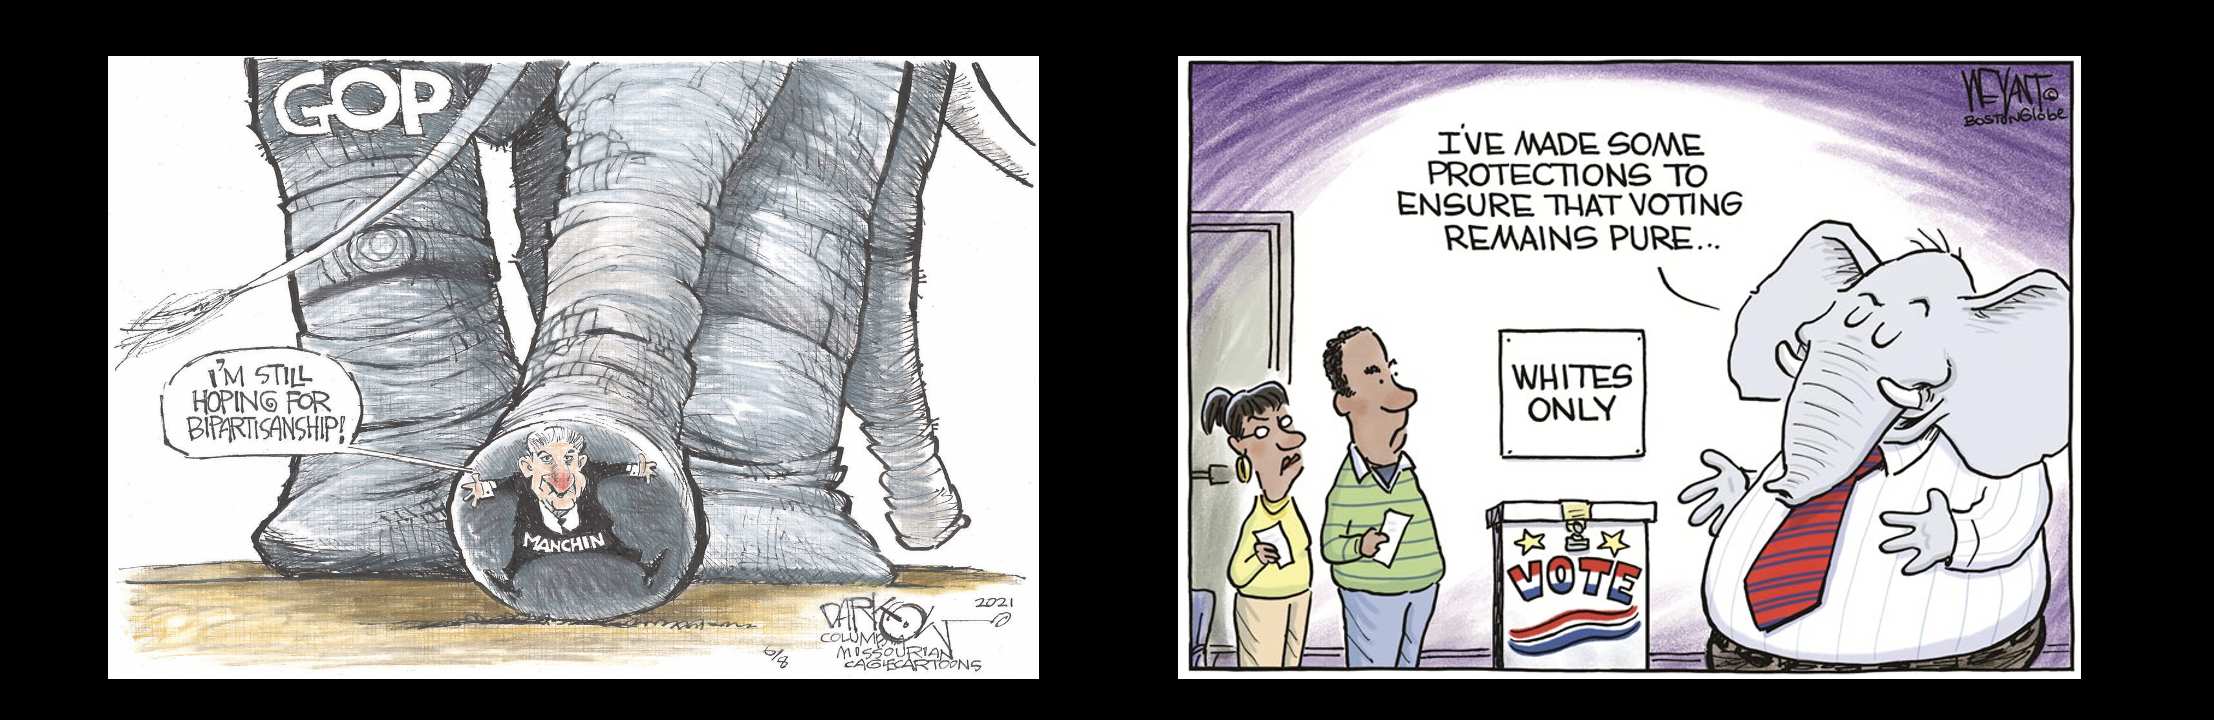 GOP Election Nonsense lampooned in Political Cartoons